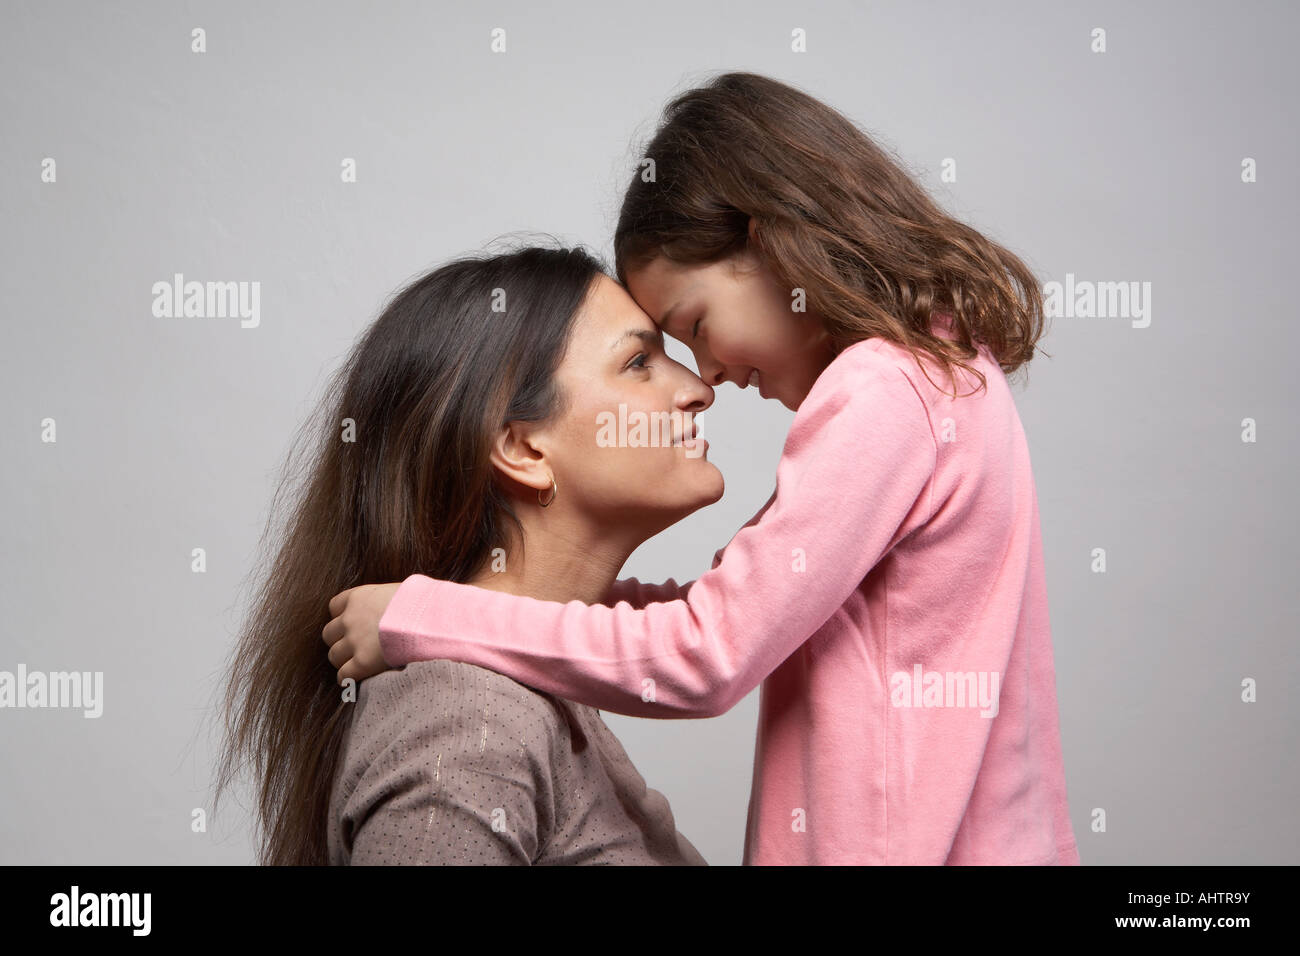 Mother face to face with daughter (5-7), side view Stock Photo